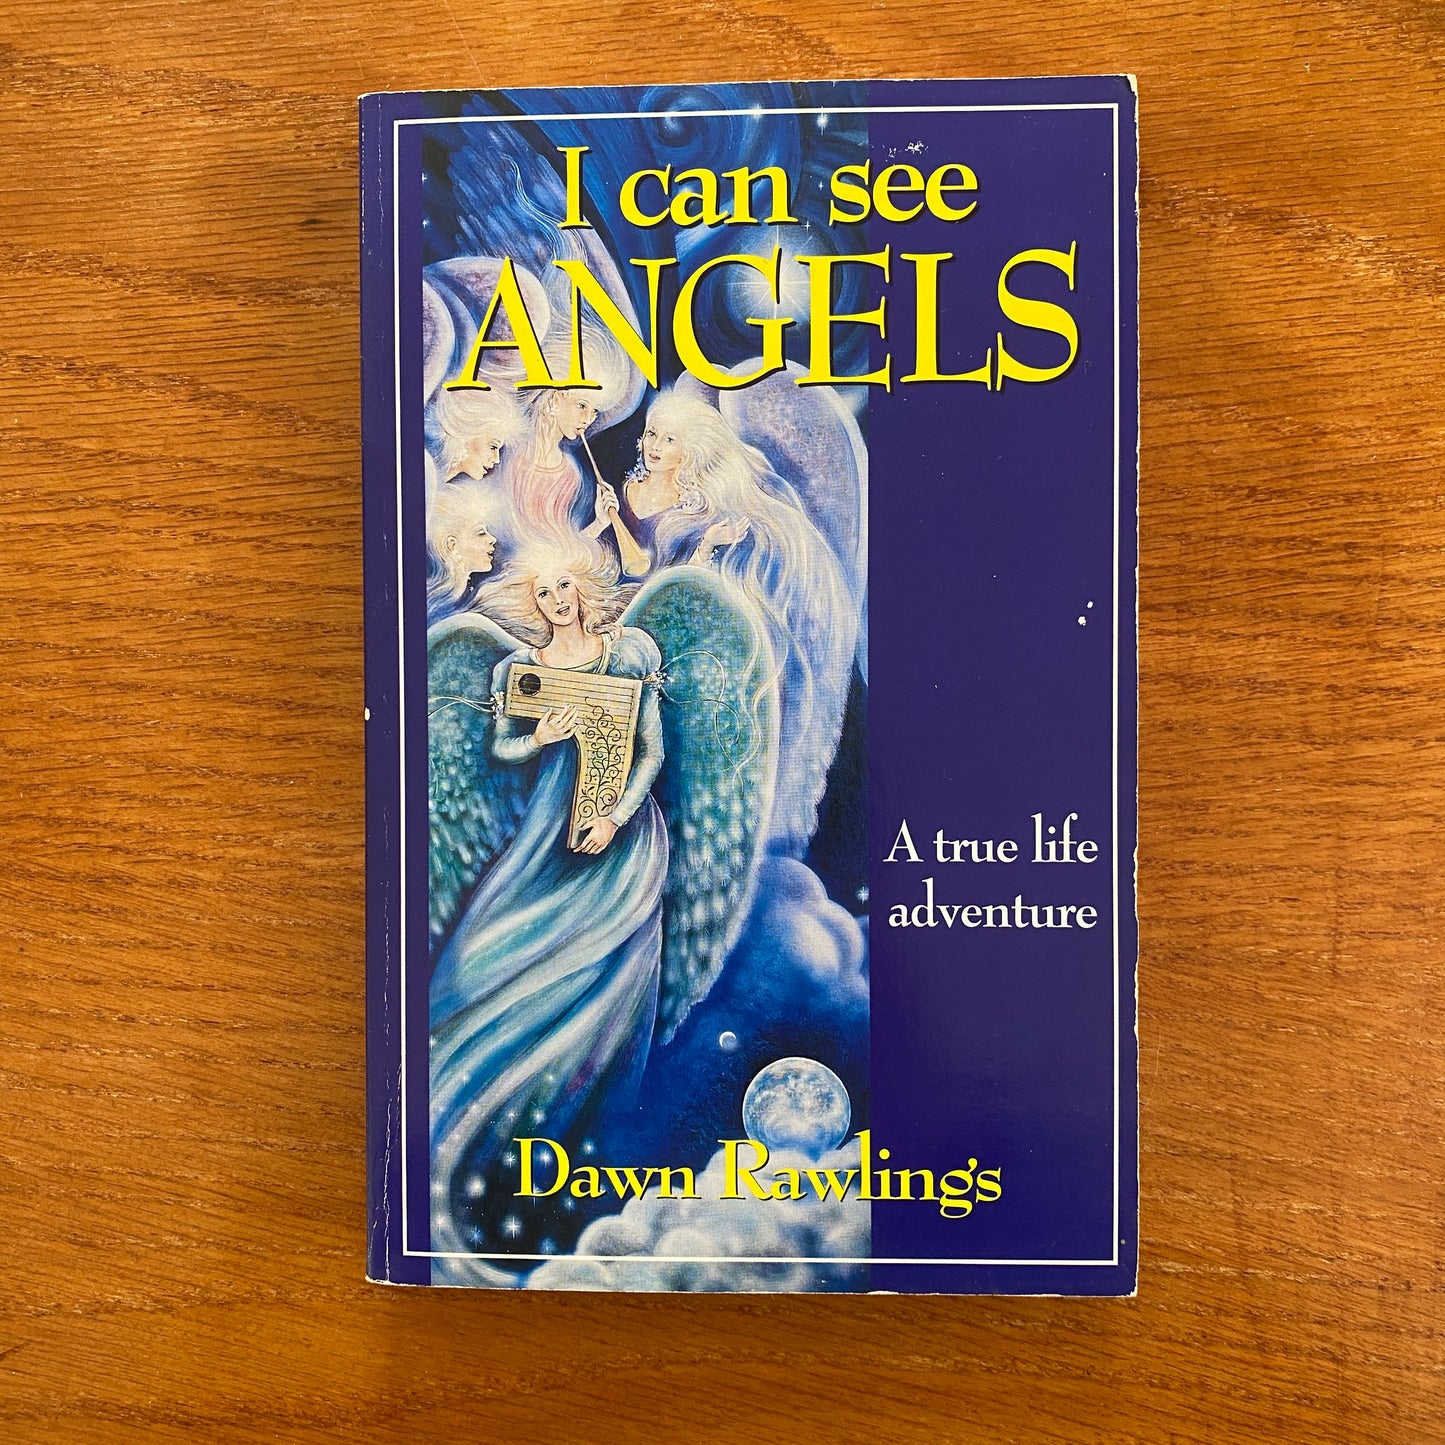 Book about angels